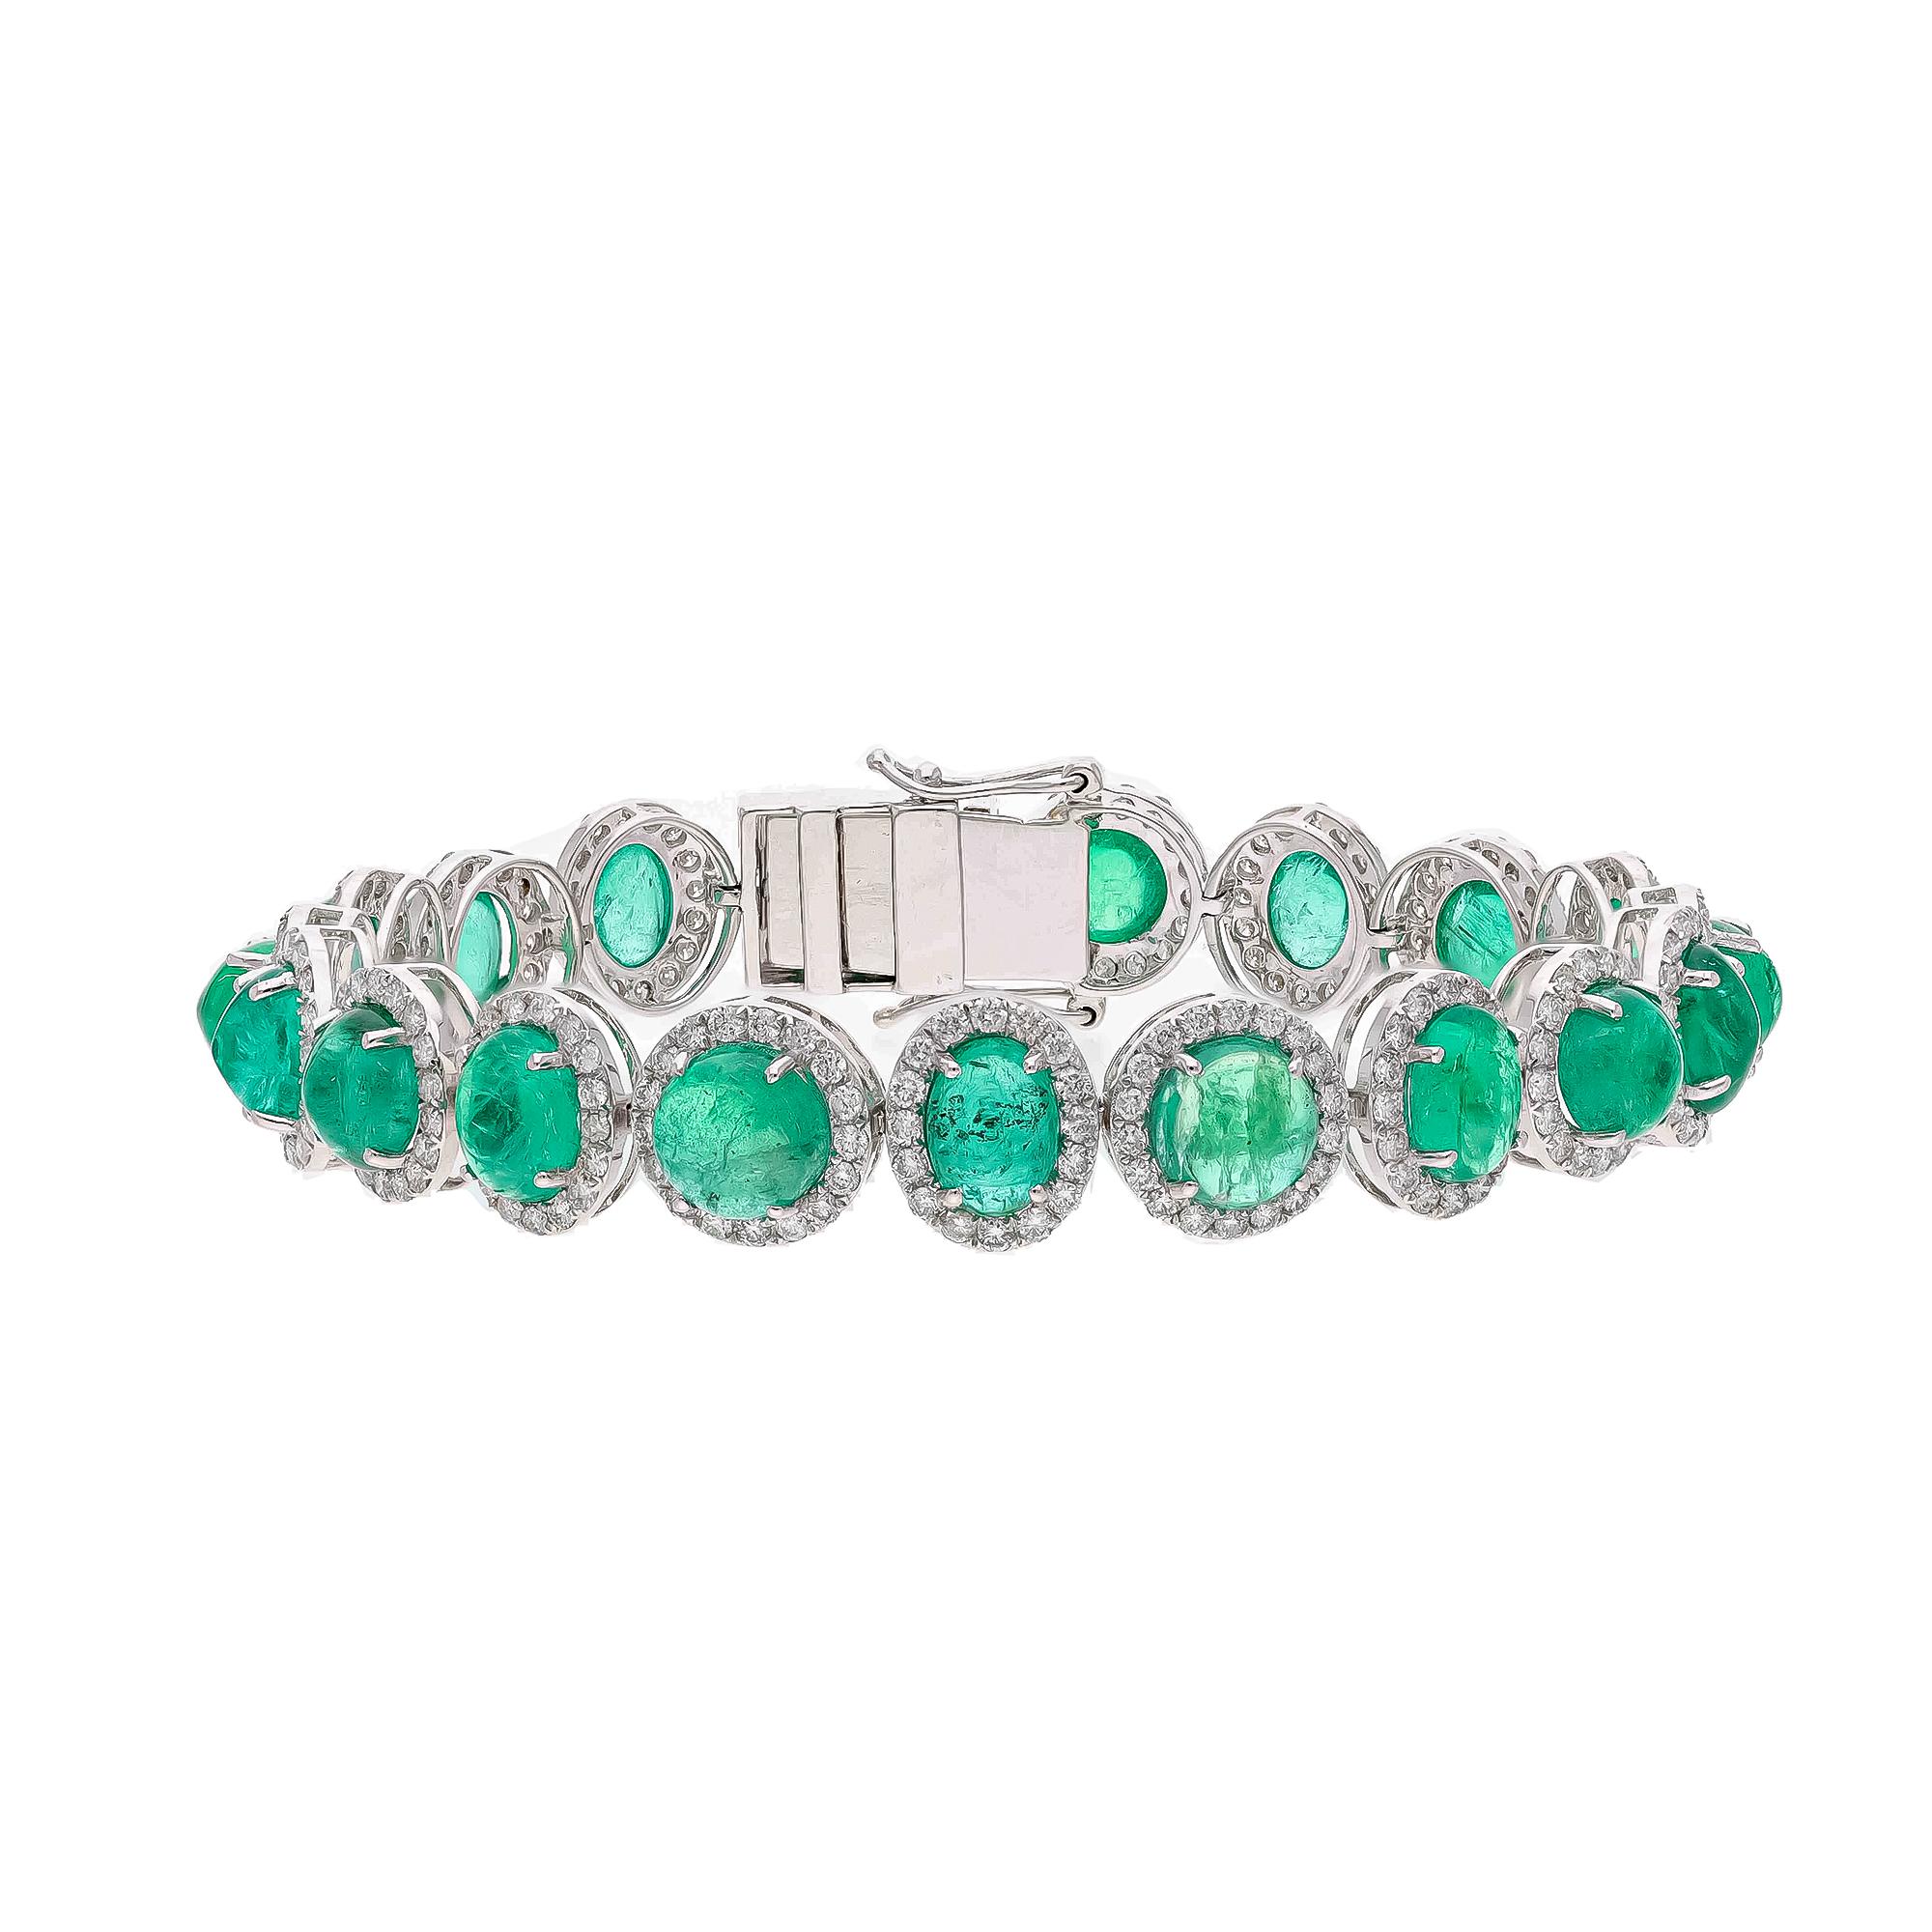 This is a stunning natural Zambian Emerald bracelet which has Emerald of very high quality and diamonds of very good quality . it has vsi clarity and G colour.

Emerald caboshans  : 20.93 cts
diamonds : 3.49 cts
gold : 15.246 gms

Its very hard to